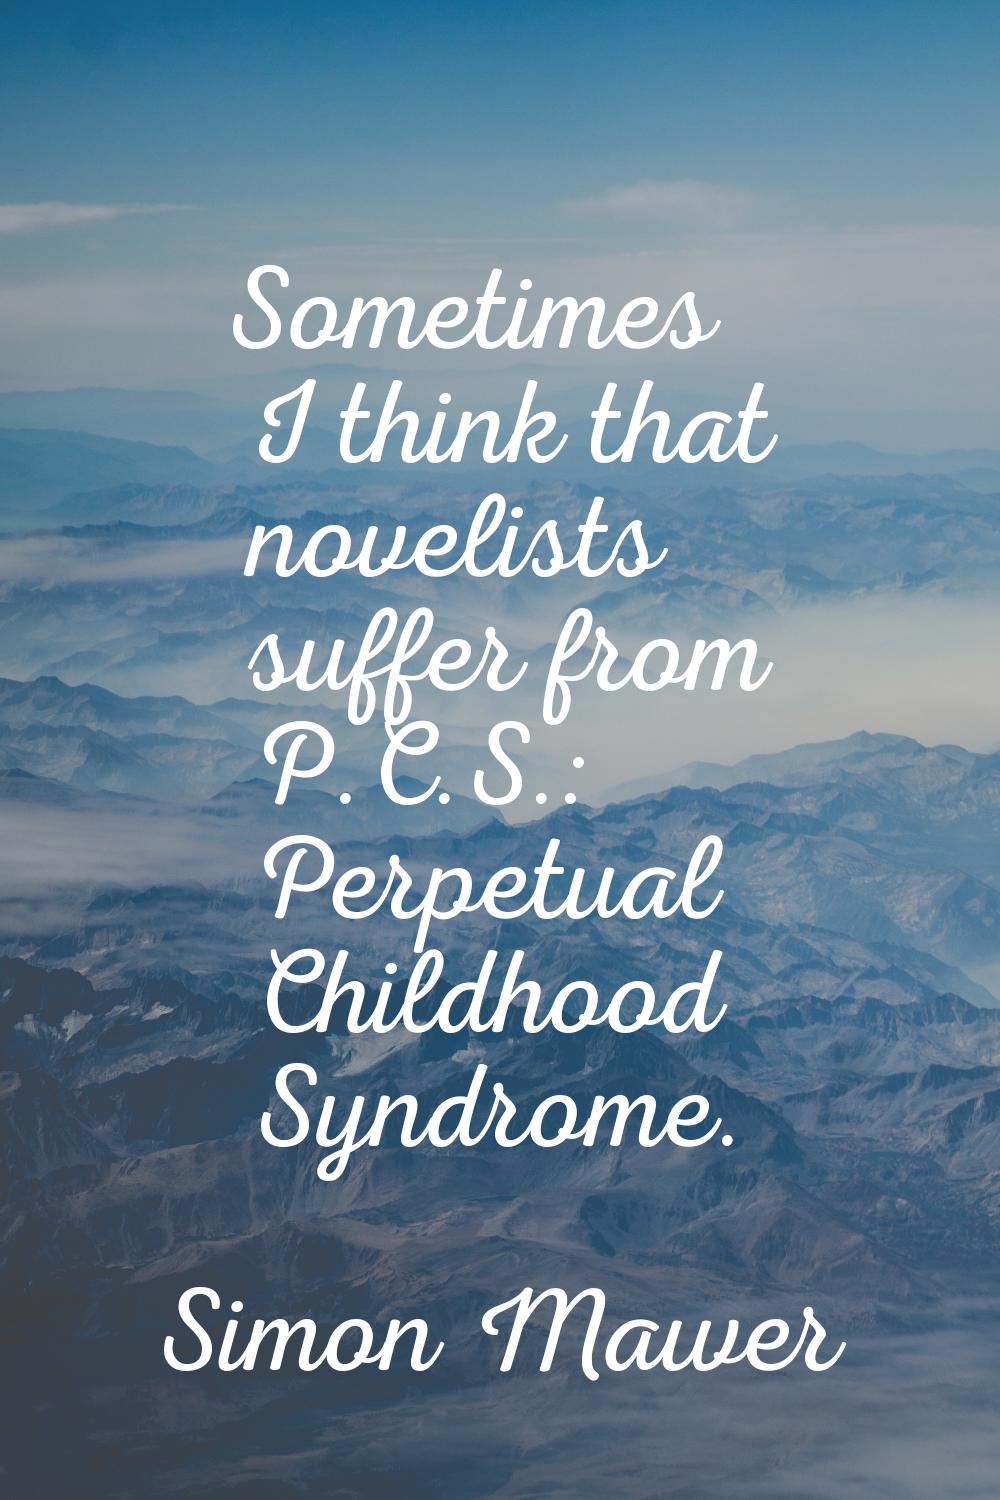 Sometimes I think that novelists suffer from P.C.S.: Perpetual Childhood Syndrome.